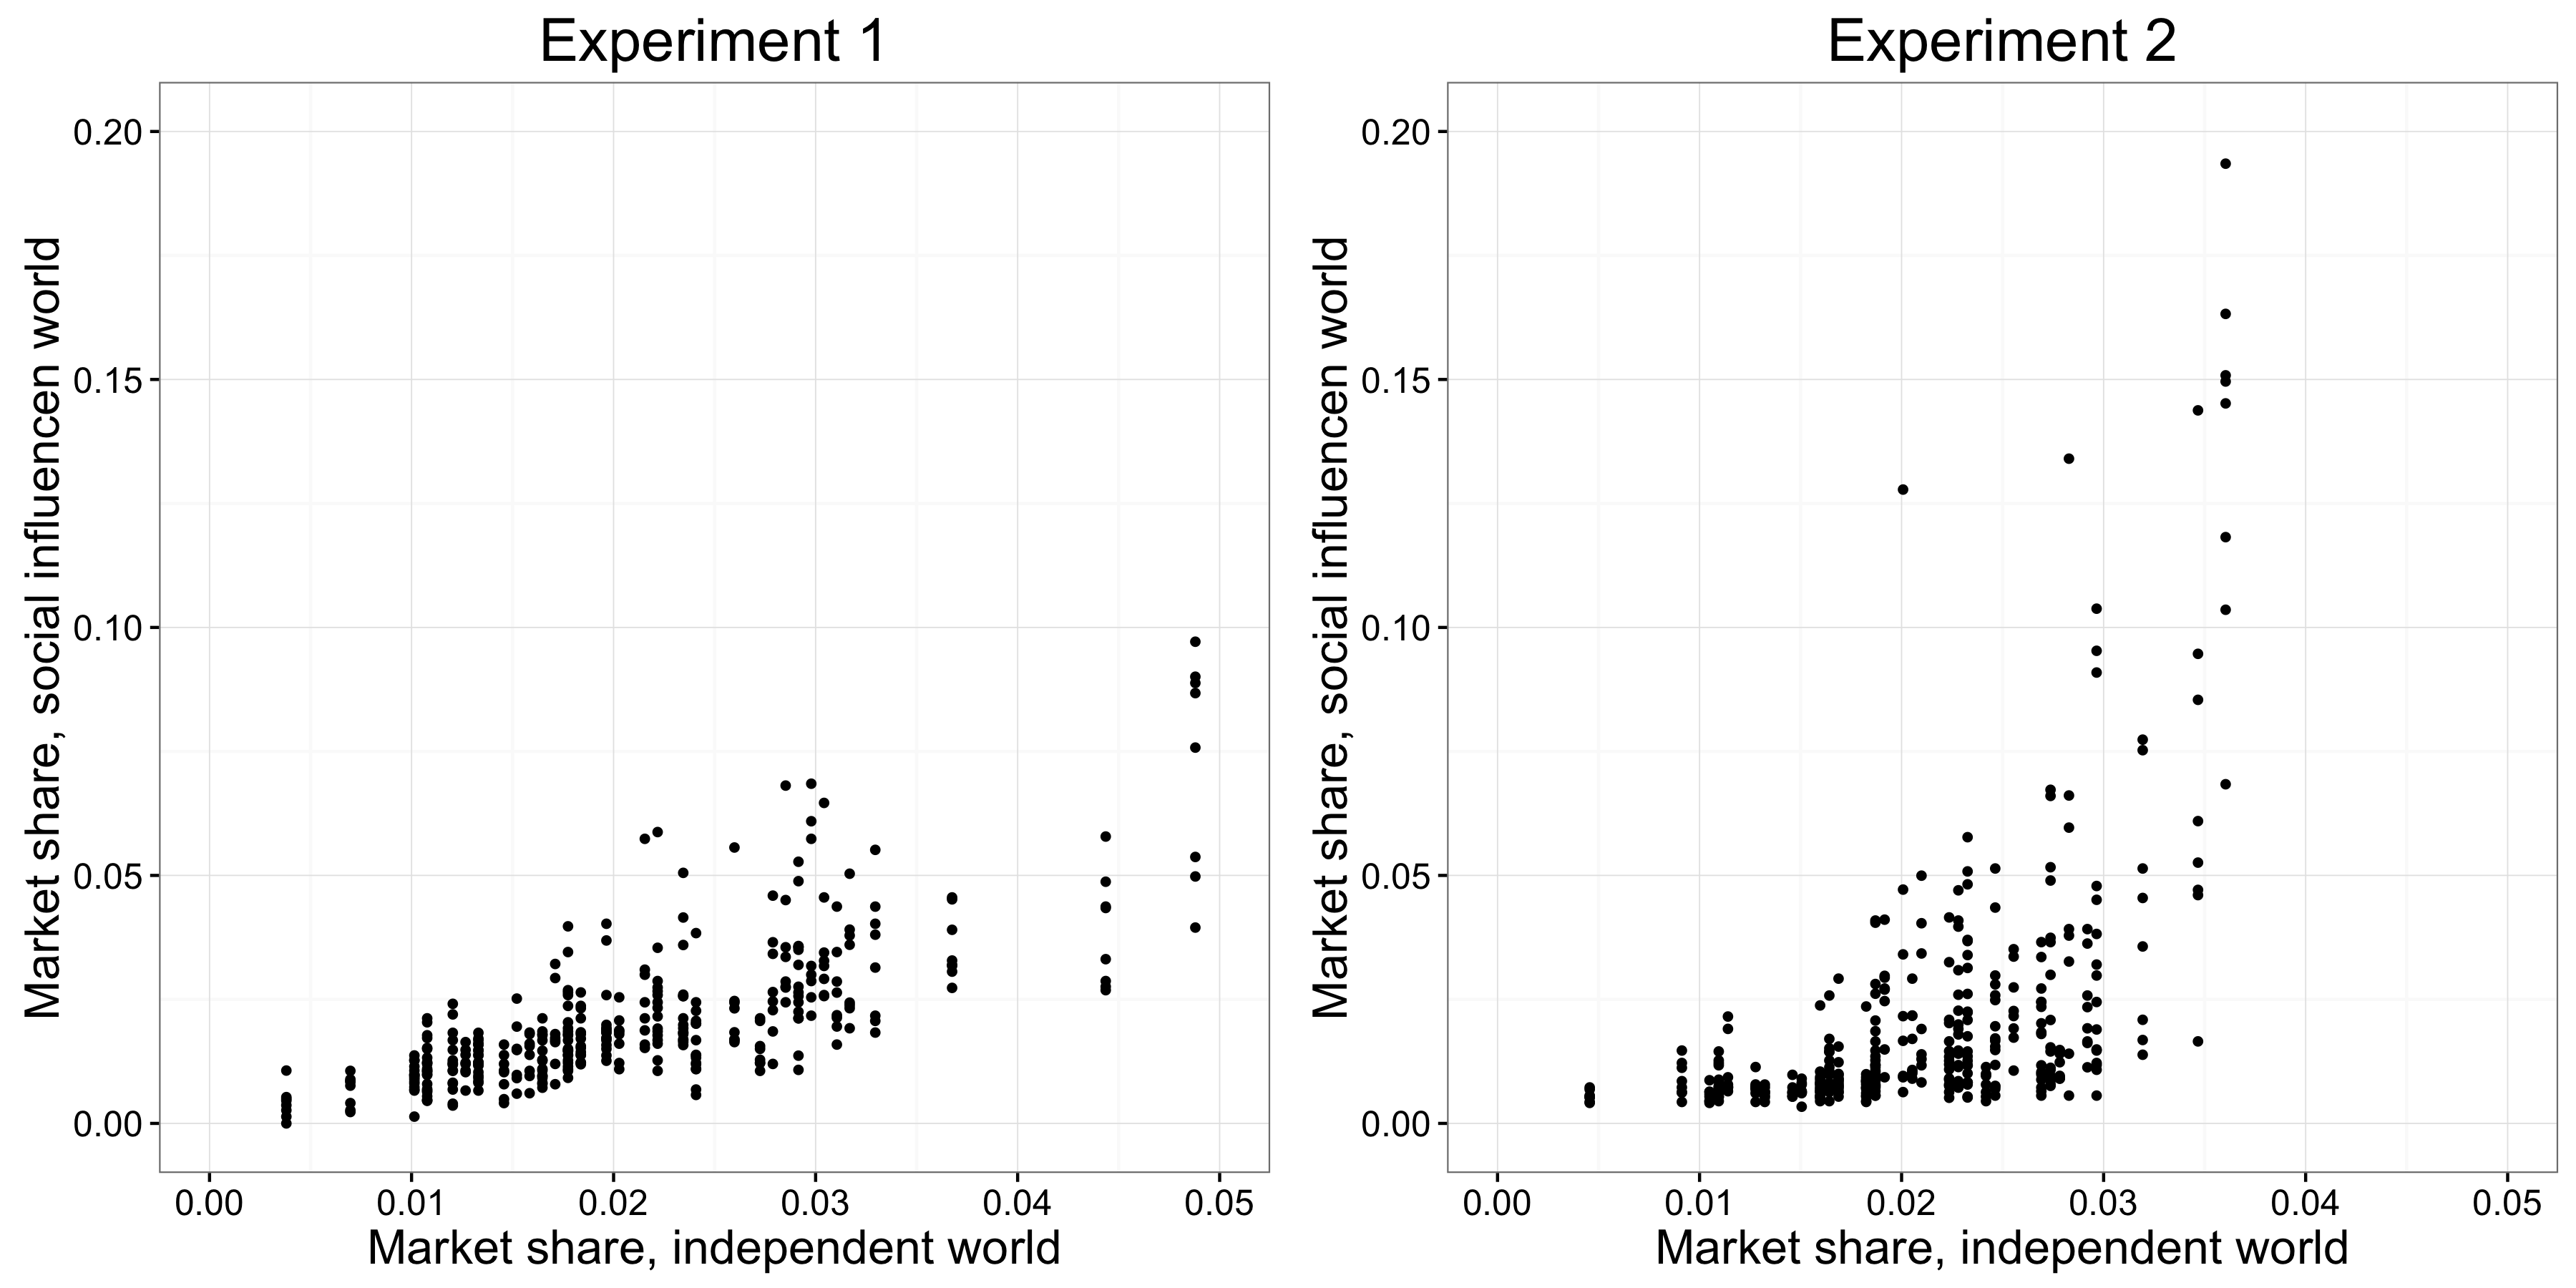 Figure 4.22: Results from the MusicLab experiments showing the relationship between appeal and success (Salganik, Dodds, and Watts 2006). The x-axis is the market share of the song in the independent world, which serves as a measure of the appeal of the song, and the y-axis is the market share of the same song in the 8 social influence worlds, which serves as a measure of the success of the songs. We found that increasing the social influence that participants experienced—specifically, the change in layout from experiment 1 to experiment 2 (Figure 4.21)—caused success to become more unpredictable, especially for the highest appeal songs.